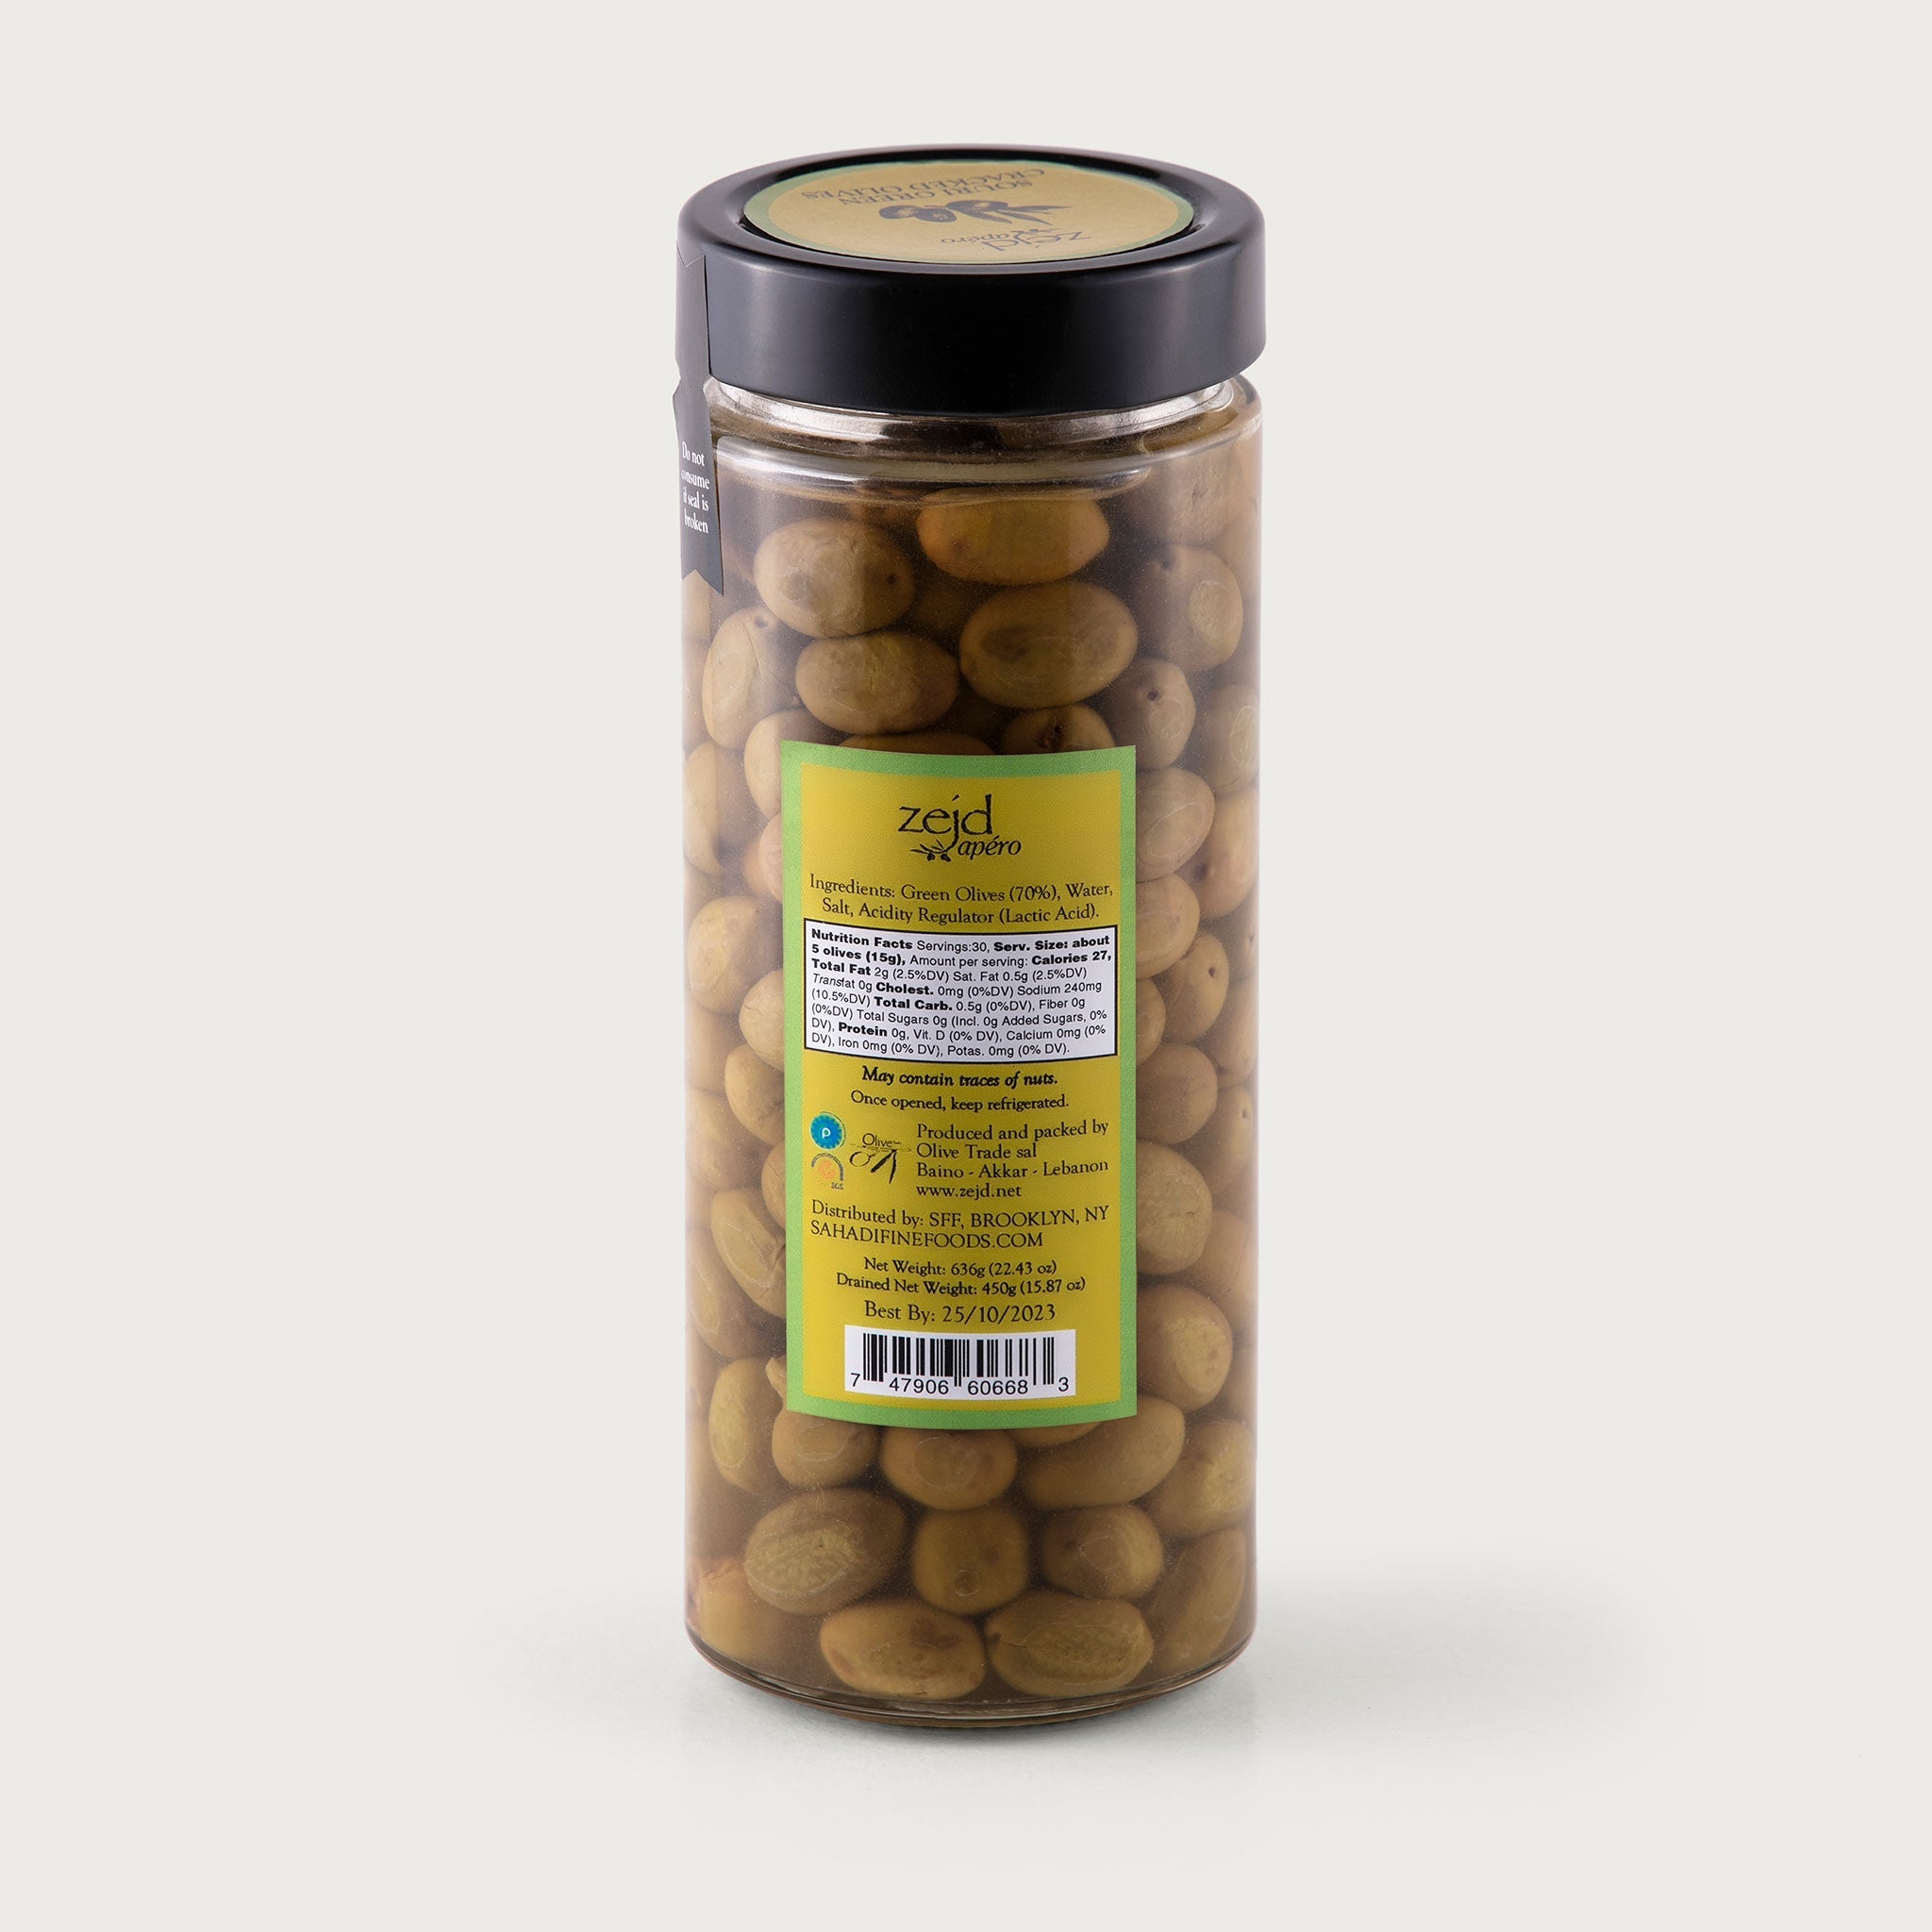 This tall jar of olives is clear in color and you can see the souri green olives and their brine. The lid is black, the label is yellow with a green border. The Zejd logo is present, alongside an illustration of olives and the product name Souri Green Cracked Olives.